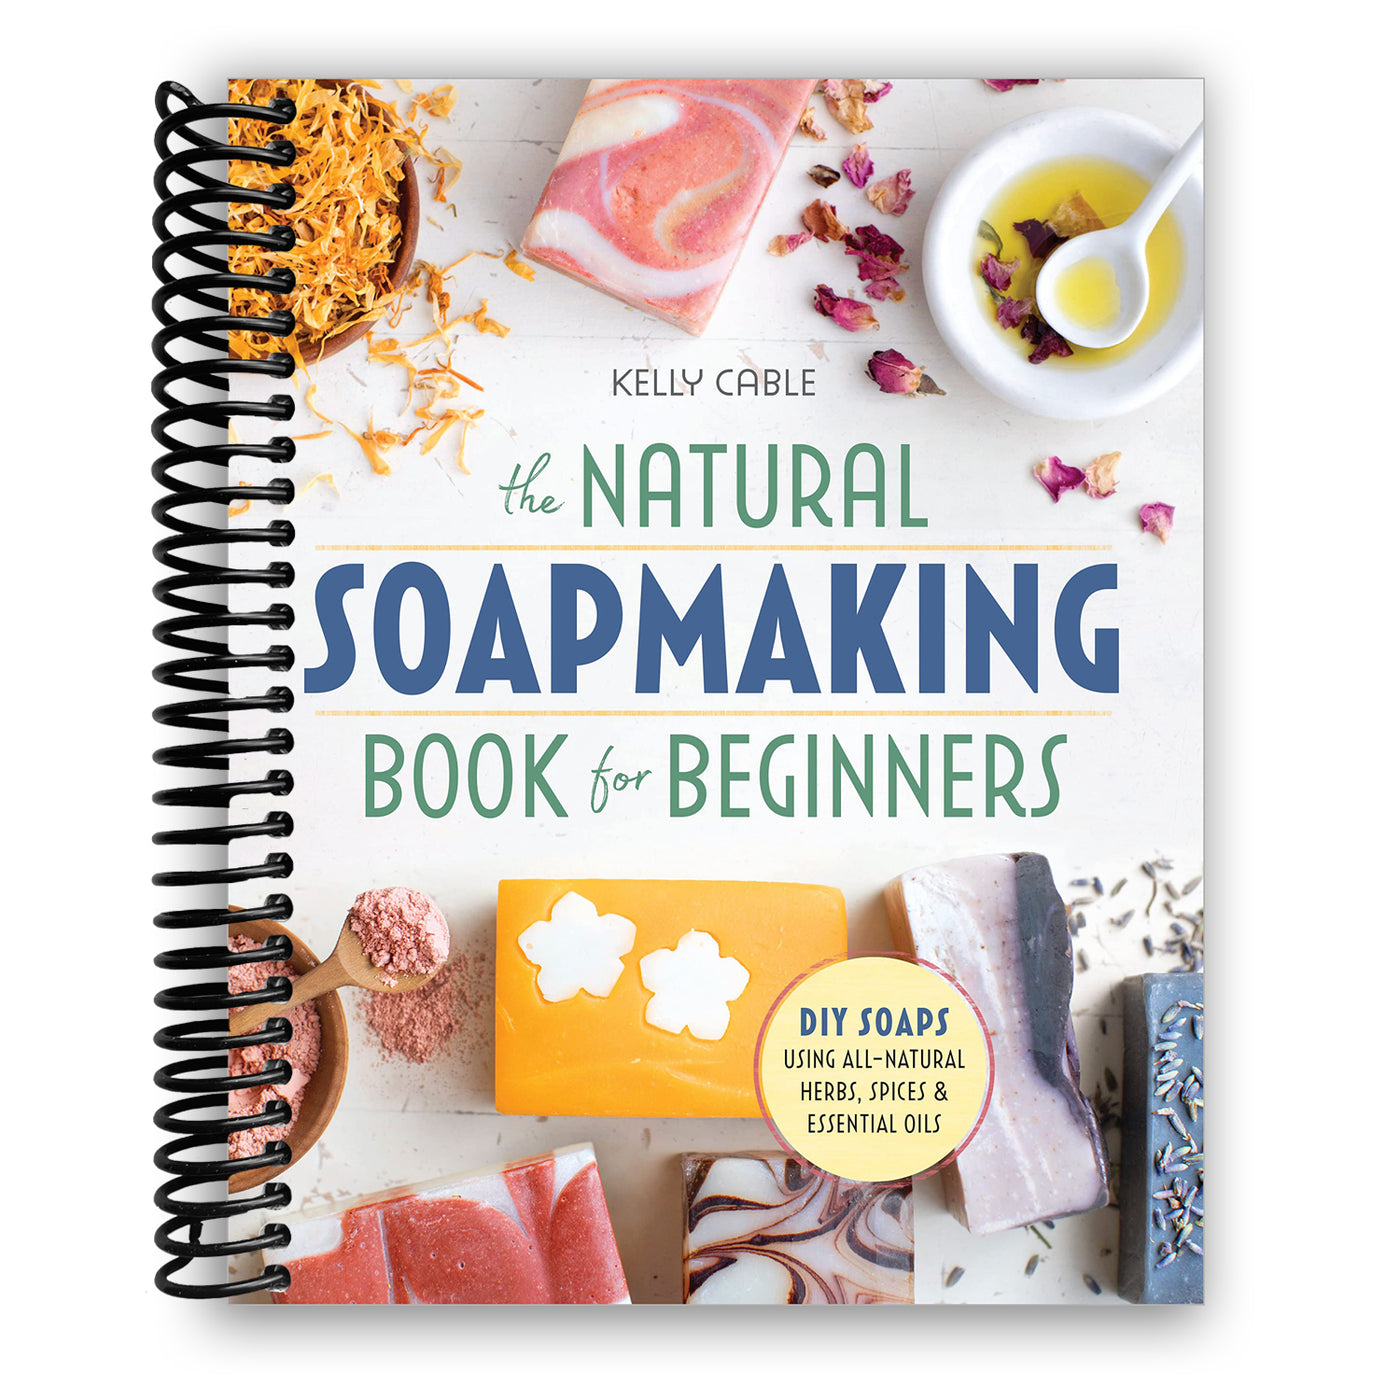 The Natural Soap Making Book for Beginners: Do-It-Yourself Soaps Using All-Natural Herbs, Spices, and Essential Oils (Spiral Bound)